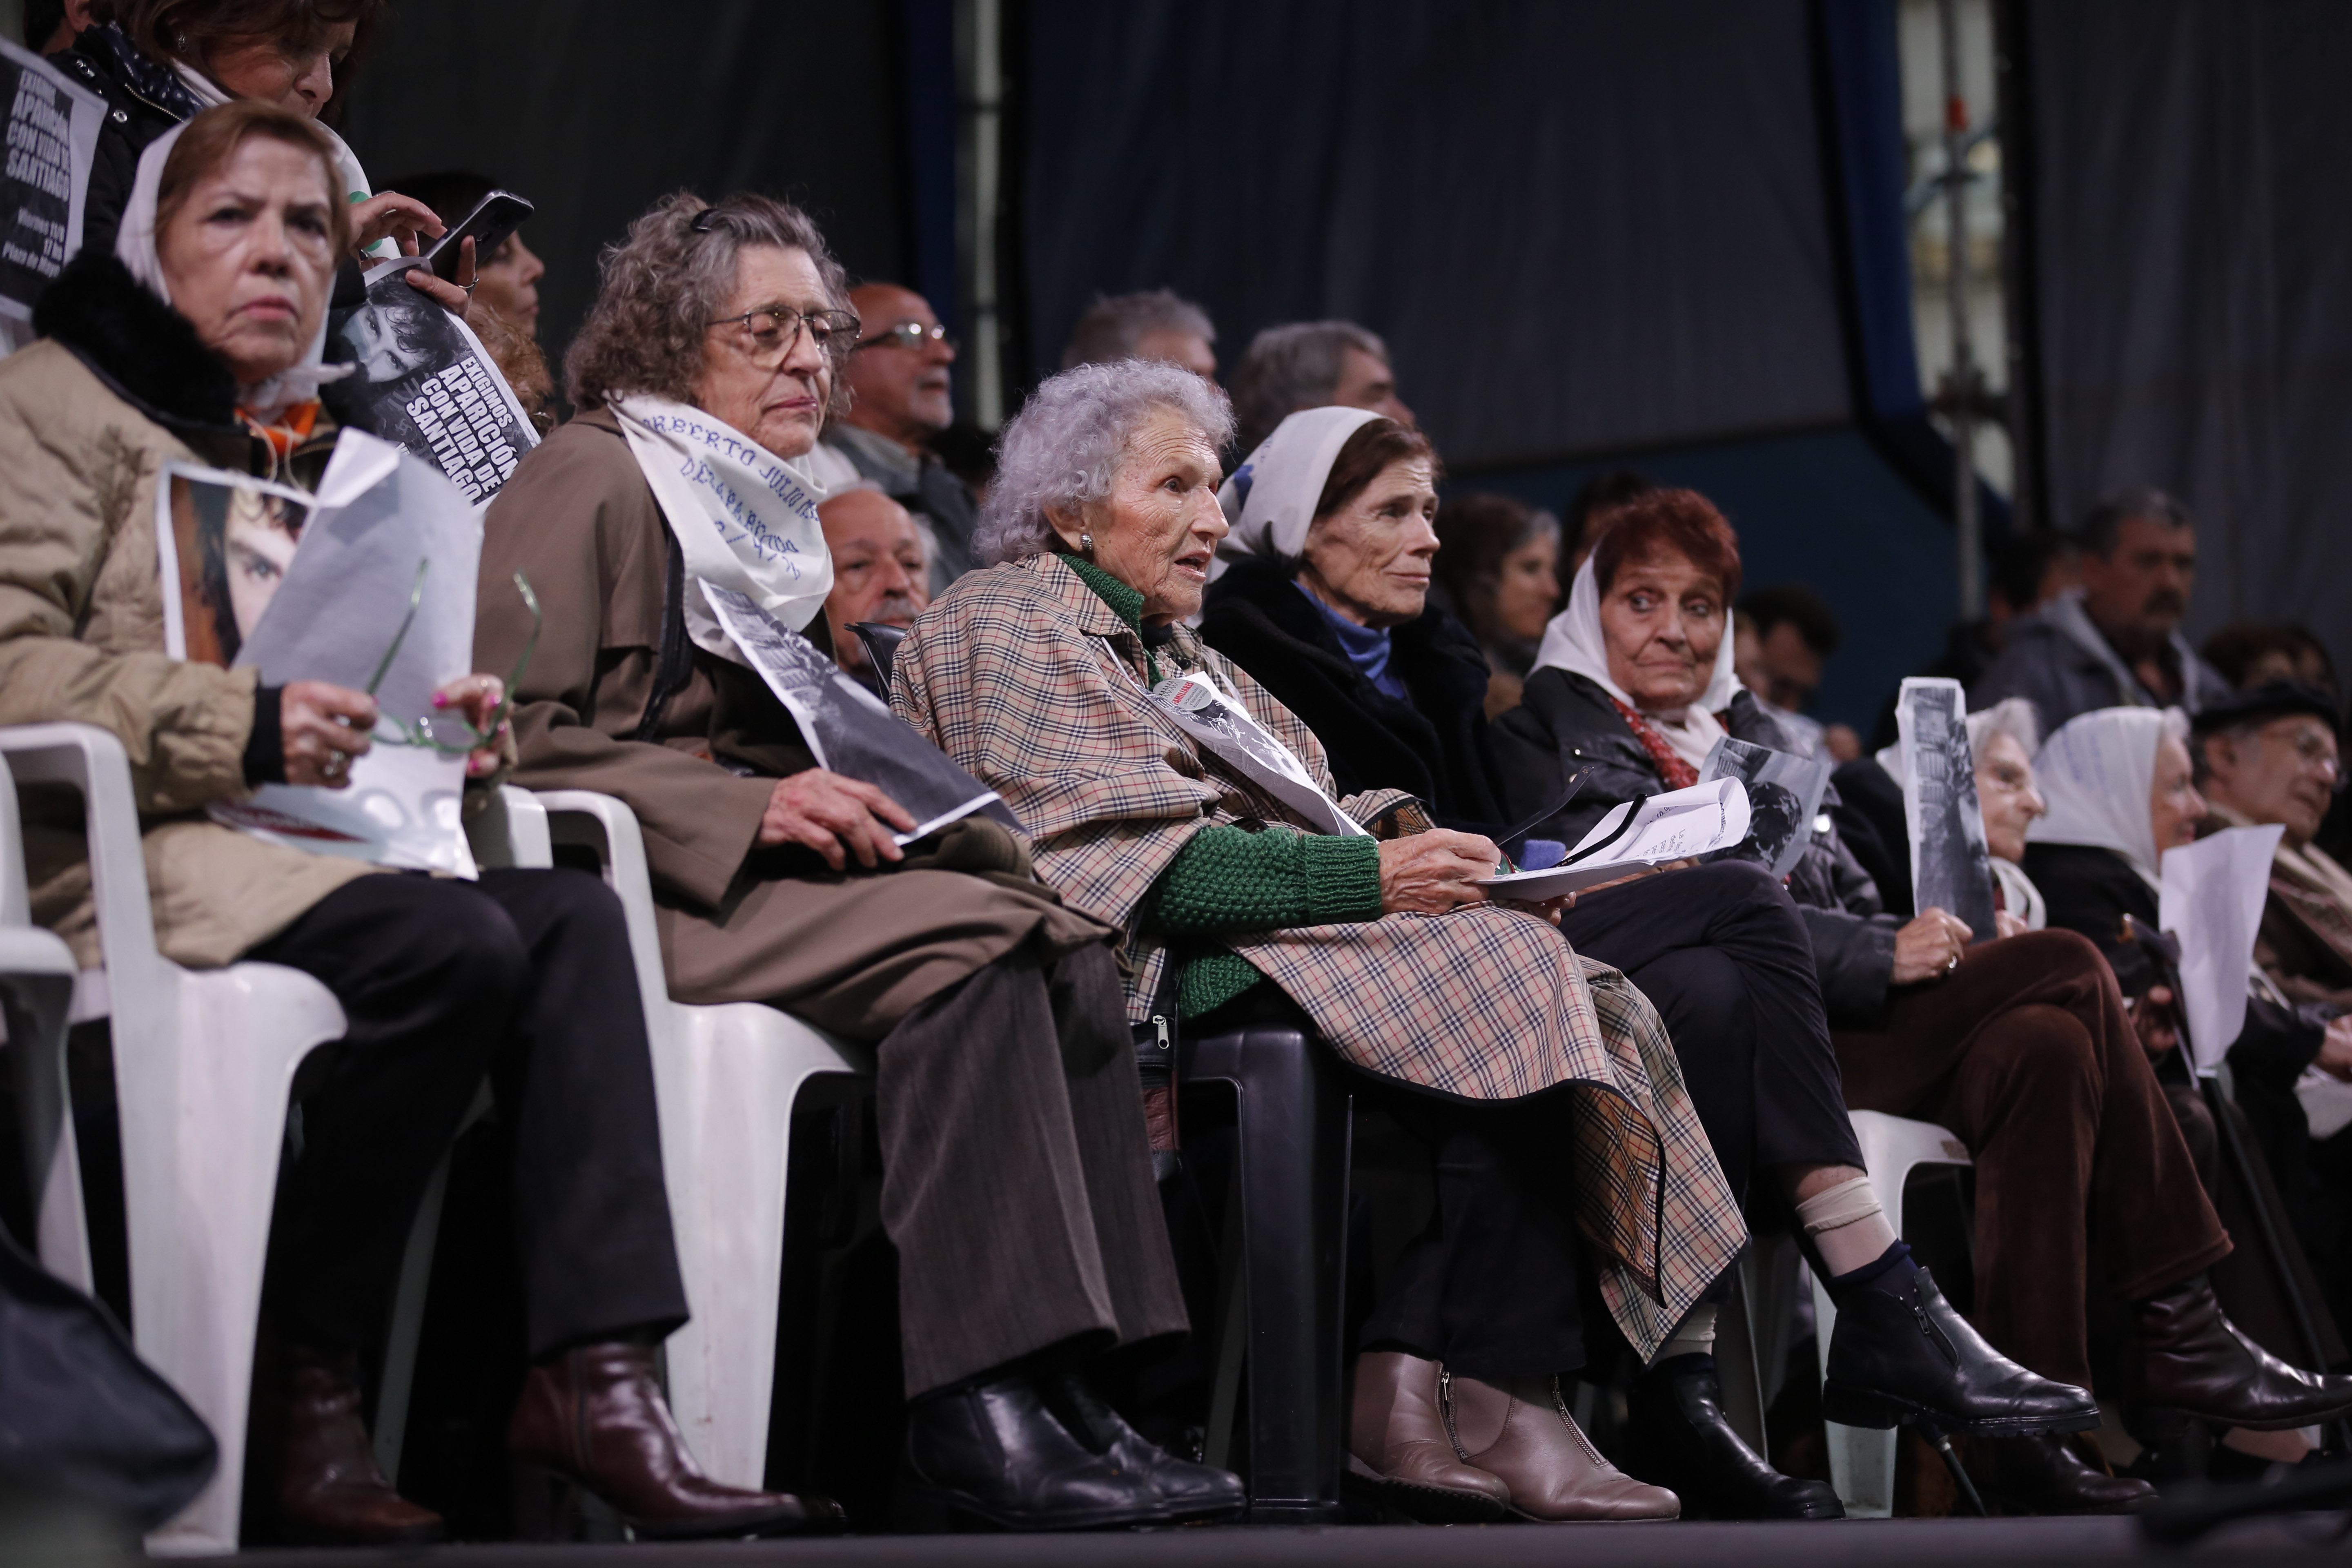 Members of Grandmothers and Mothers of Plaza de Mayo human rights groups sit on stage, some holding a photo of Santiago Maldonado, who's missing, during a demonstration at Plaza de Mayo in Buenos Aires, Argentina, Friday, Aug. 11, 2017. Human rights groups say Maldonado went missing after Argentine border police captured him on Aug. 1 during an operative against Mapuche indigenous who were blocking a highway in Argentina's Patagonia. (AP Photo/Victor R. Caivano)